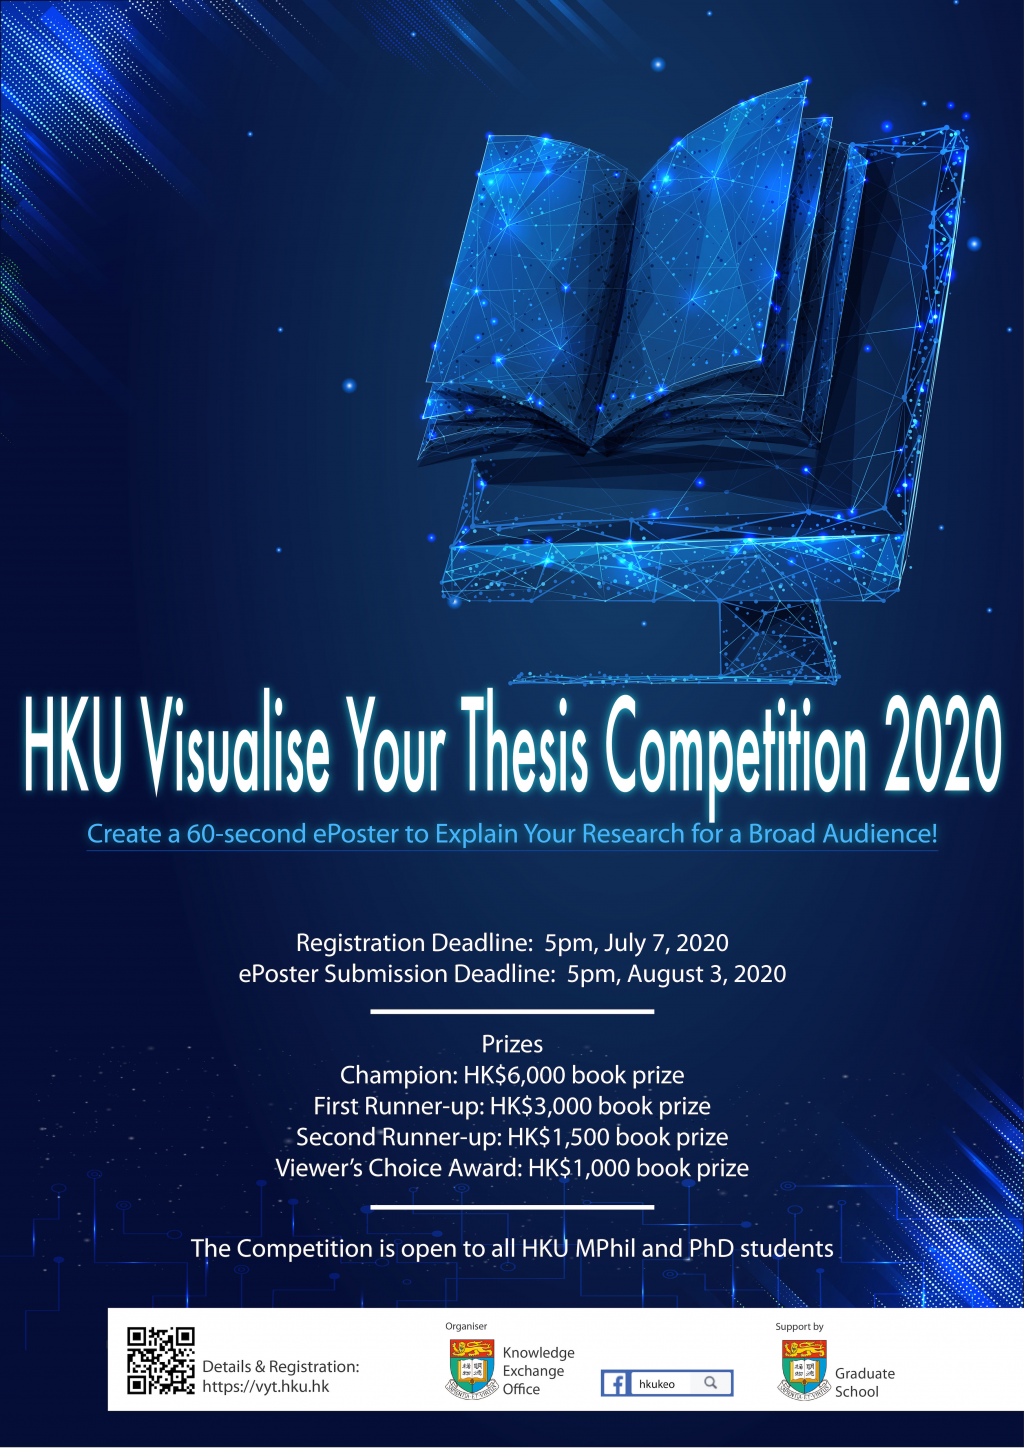 HKU Visualise Your Thesis Competition 2020